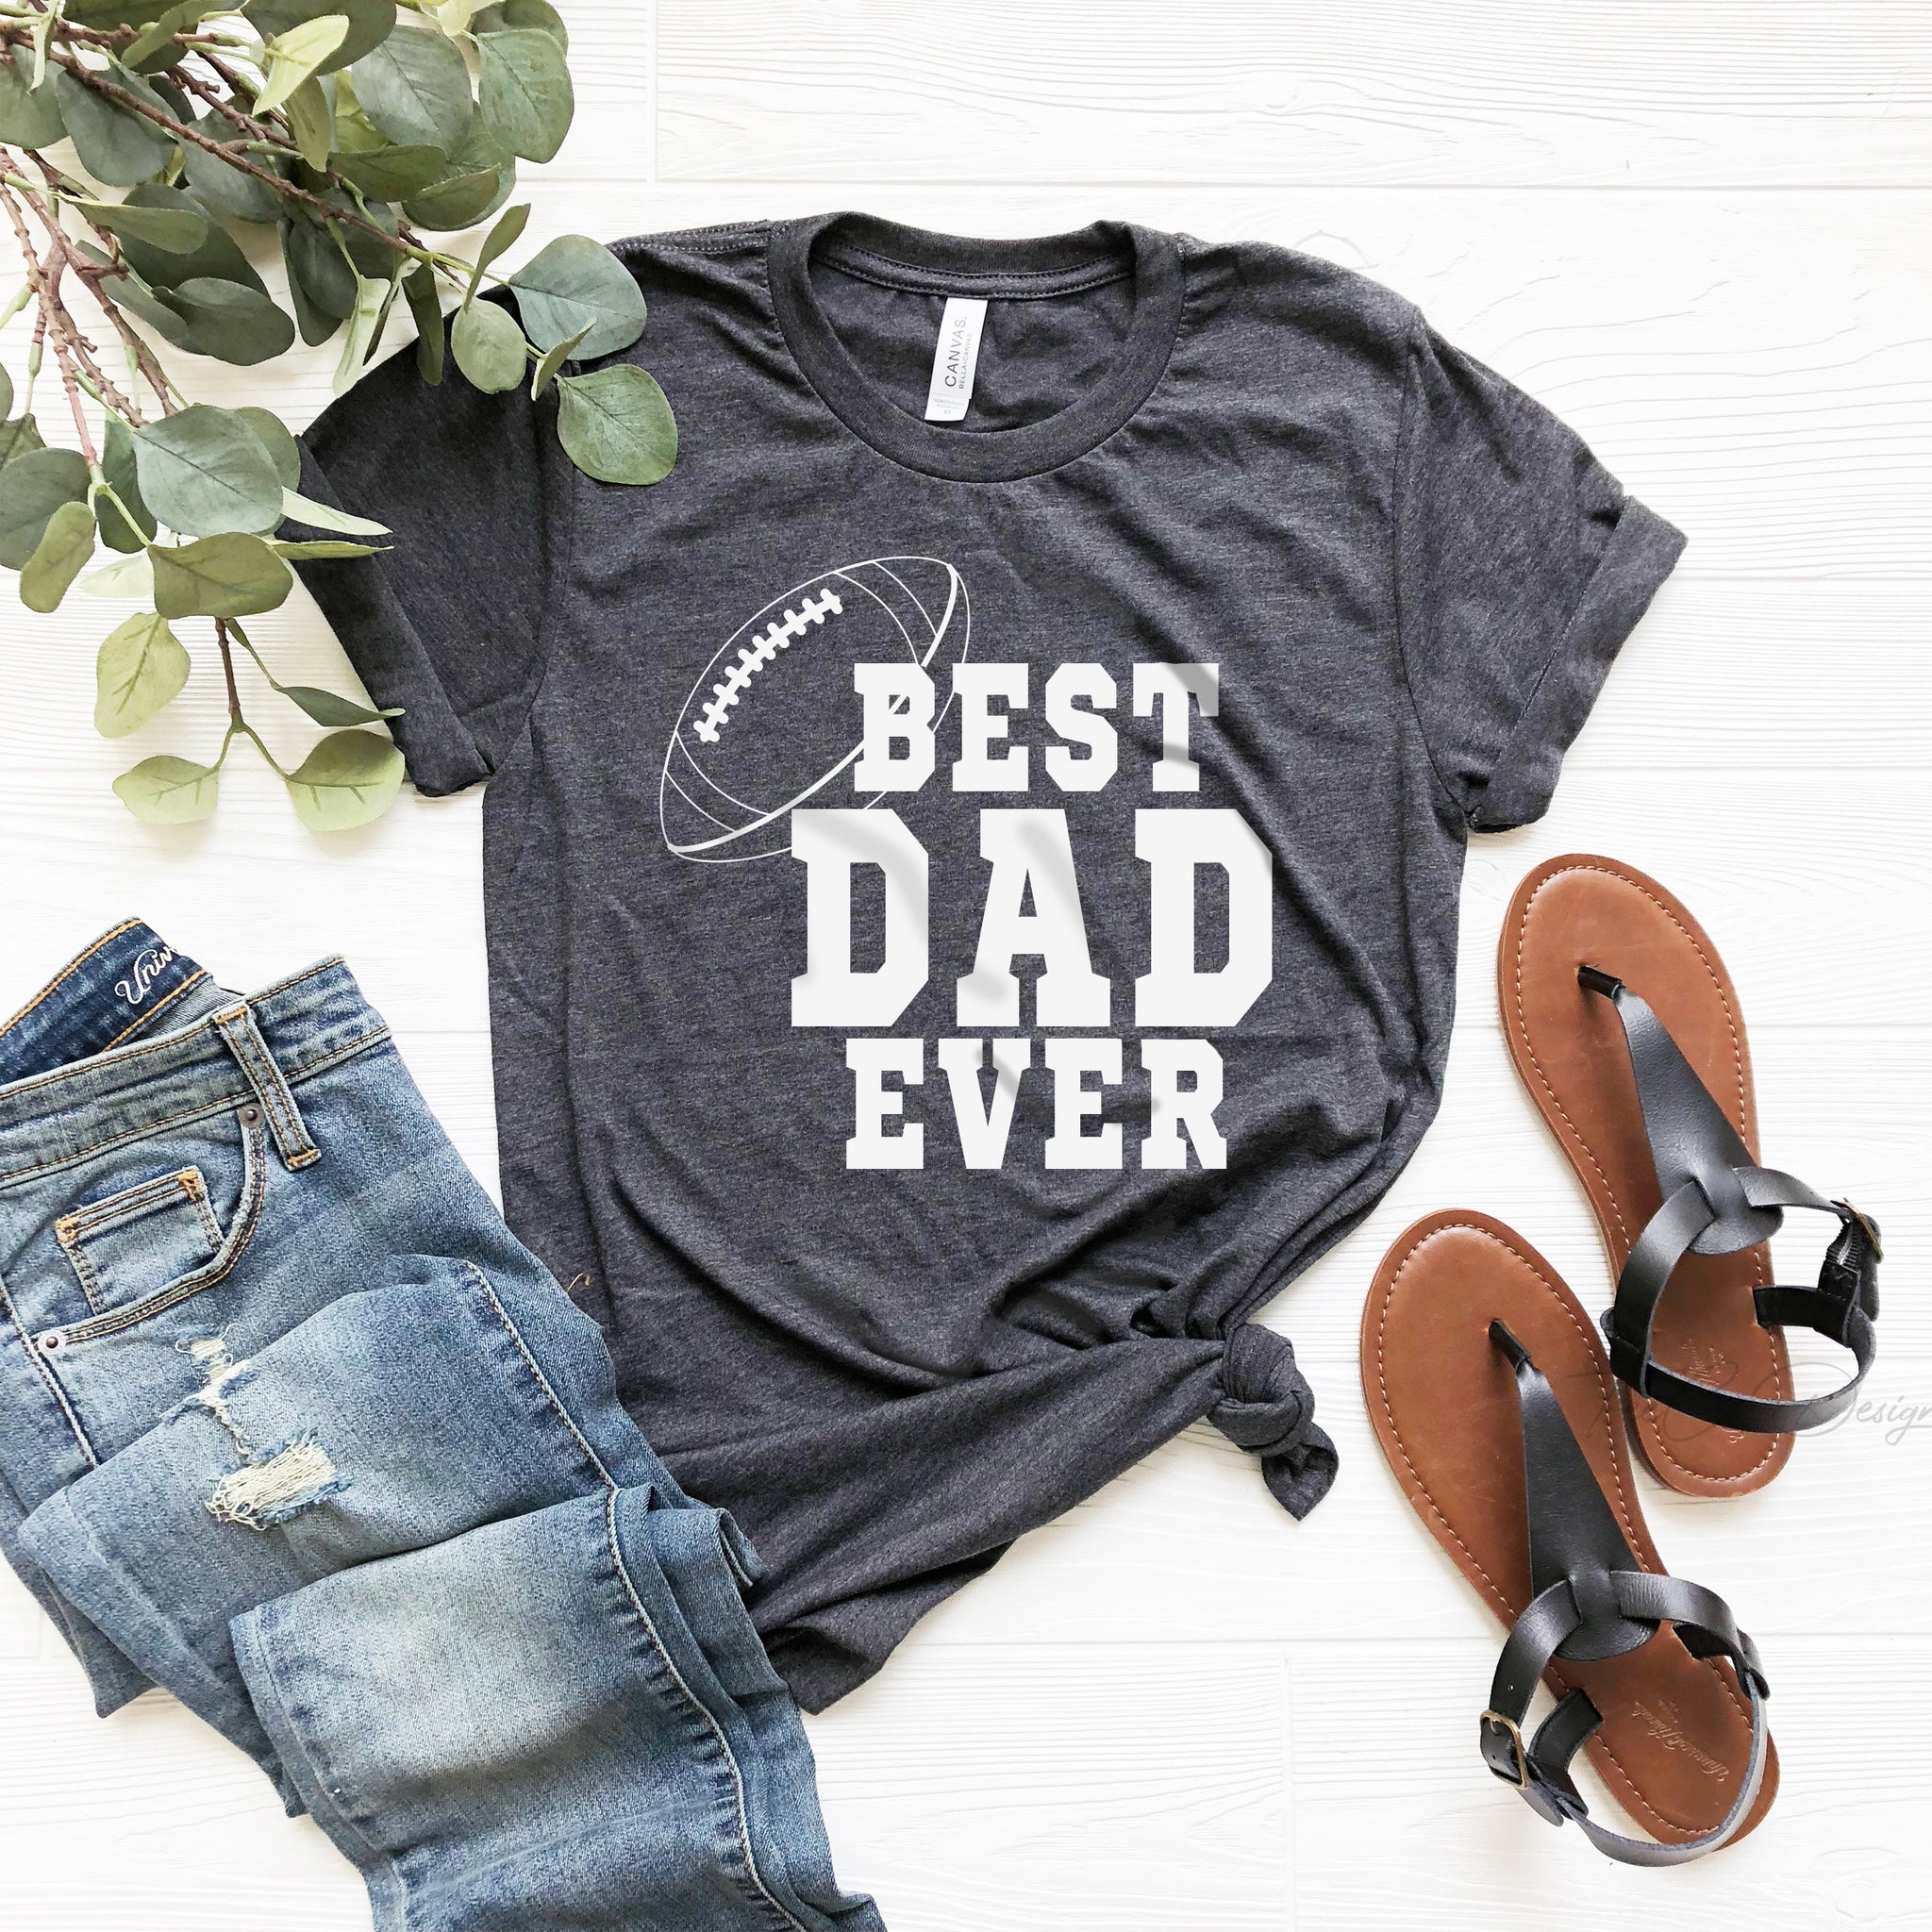 Funny Dad Tshirts for Fathers Day, Dad gift shirts, Dad shirts from daughter, Funny Shirts for husband,Dad Birthday, Football Dad - Fastdeliverytees.com